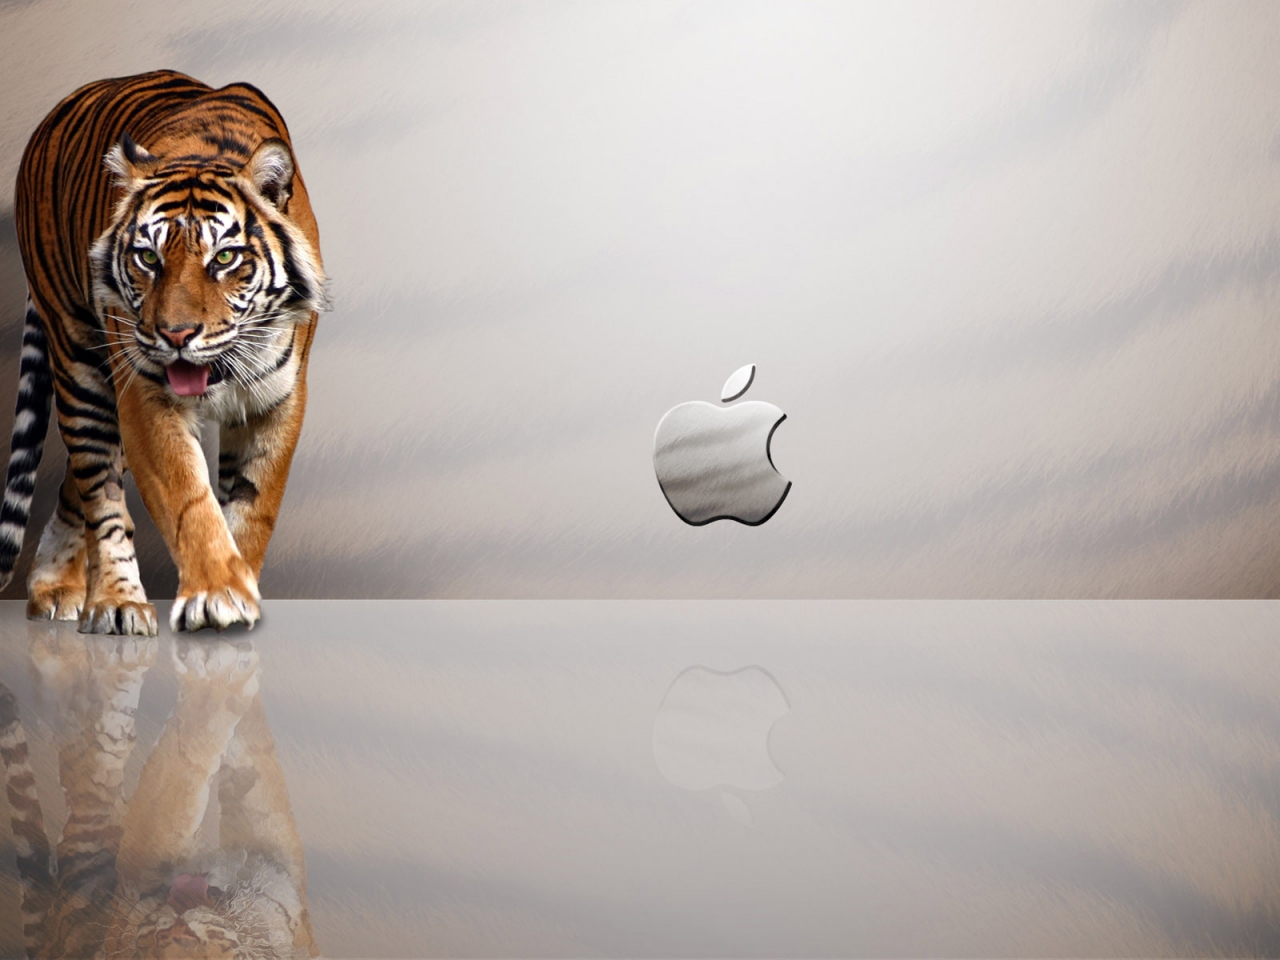 Tiger Apple for 1280 x 960 resolution